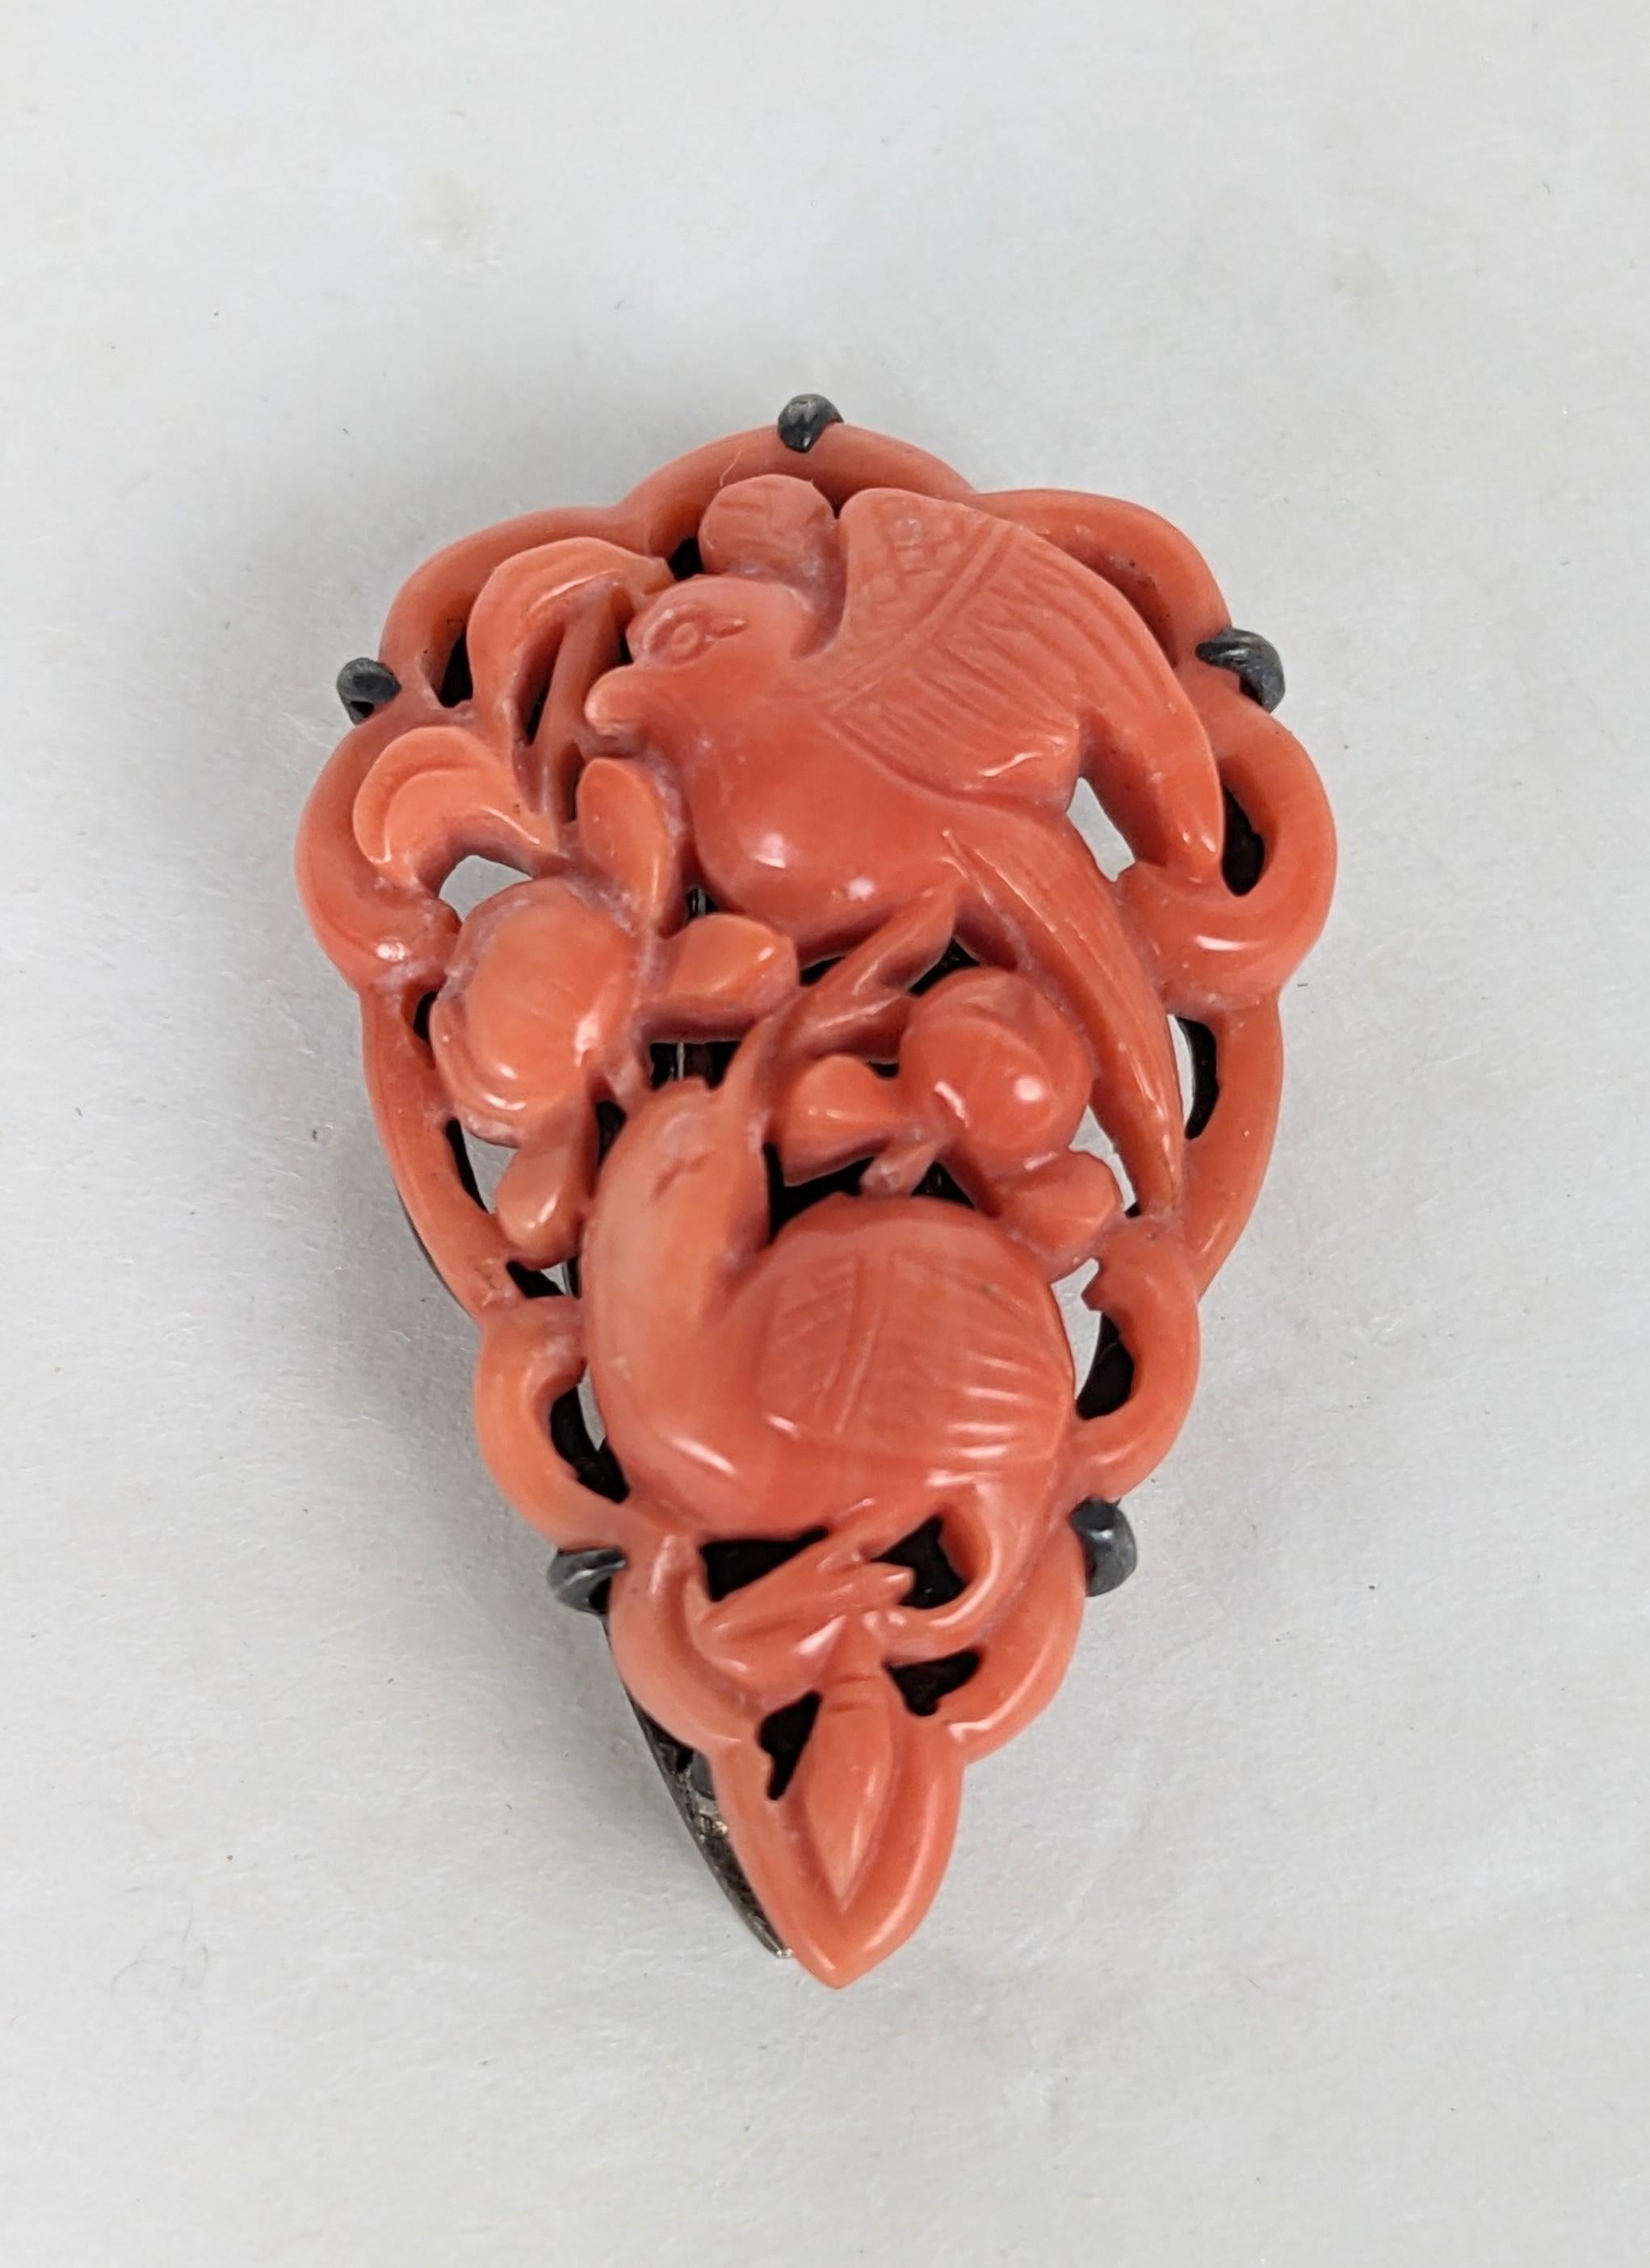 Elegant Art Deco Carved Coral Clip of birds and fruits set in sterling. Hand carved in China circa 1920 in a pierced design. Works well as a pendant clipped on beads. 1.25